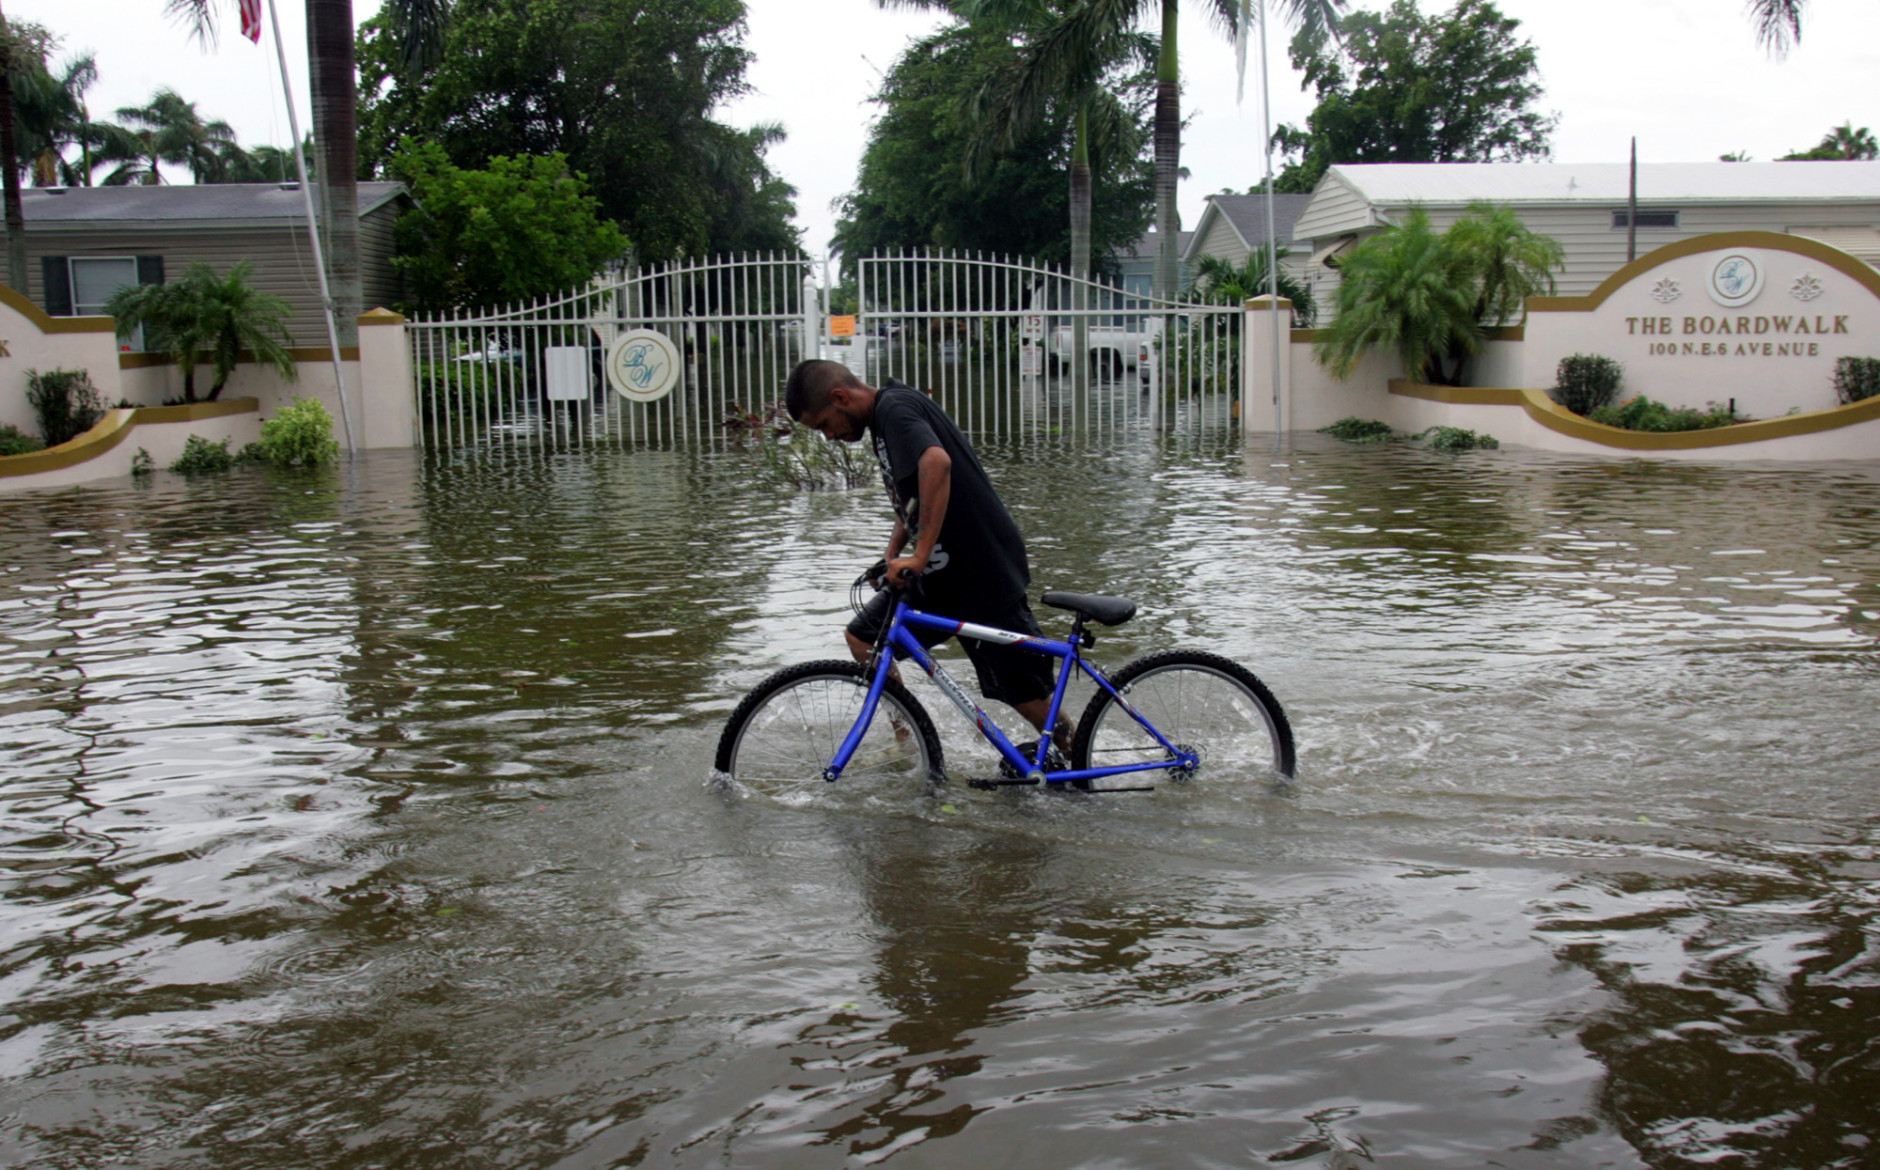 Noe Morua pushes his bike past a flooded mobile home park in Homestead, Fla., Friday, Aug. 26, 2005. Hurricane Katrina flooded streets, darkened homes and felled trees as it plowed across South Florida before emerging over the Gulf of Mexico. (AP Photo/Luis M. Alvarez)